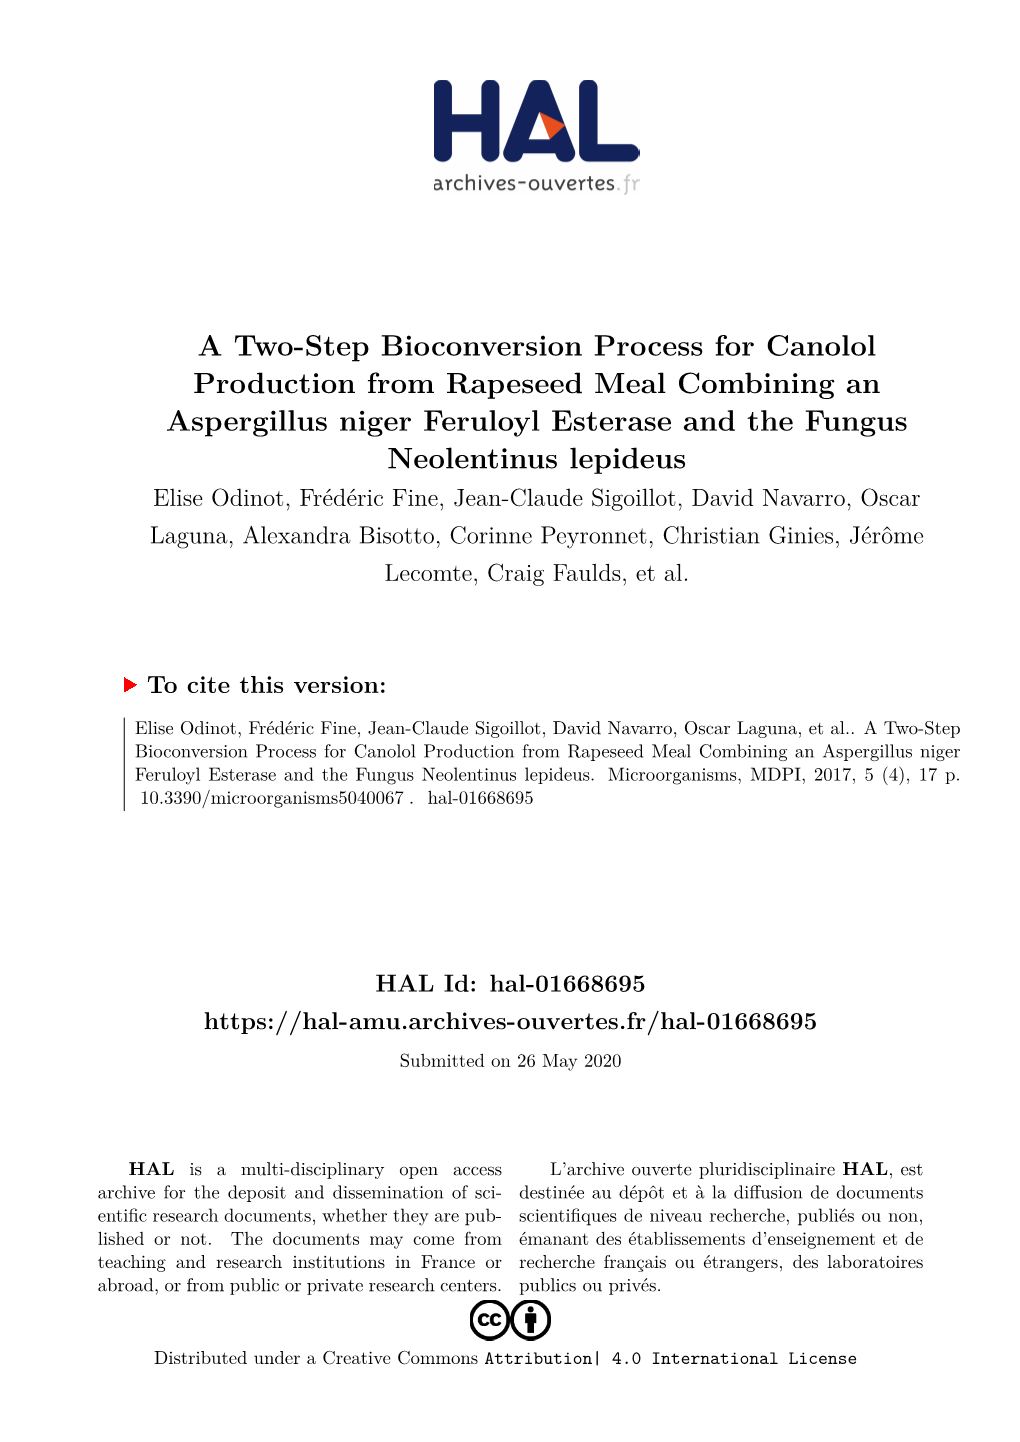 A Two-Step Bioconversion Process for Canolol Production